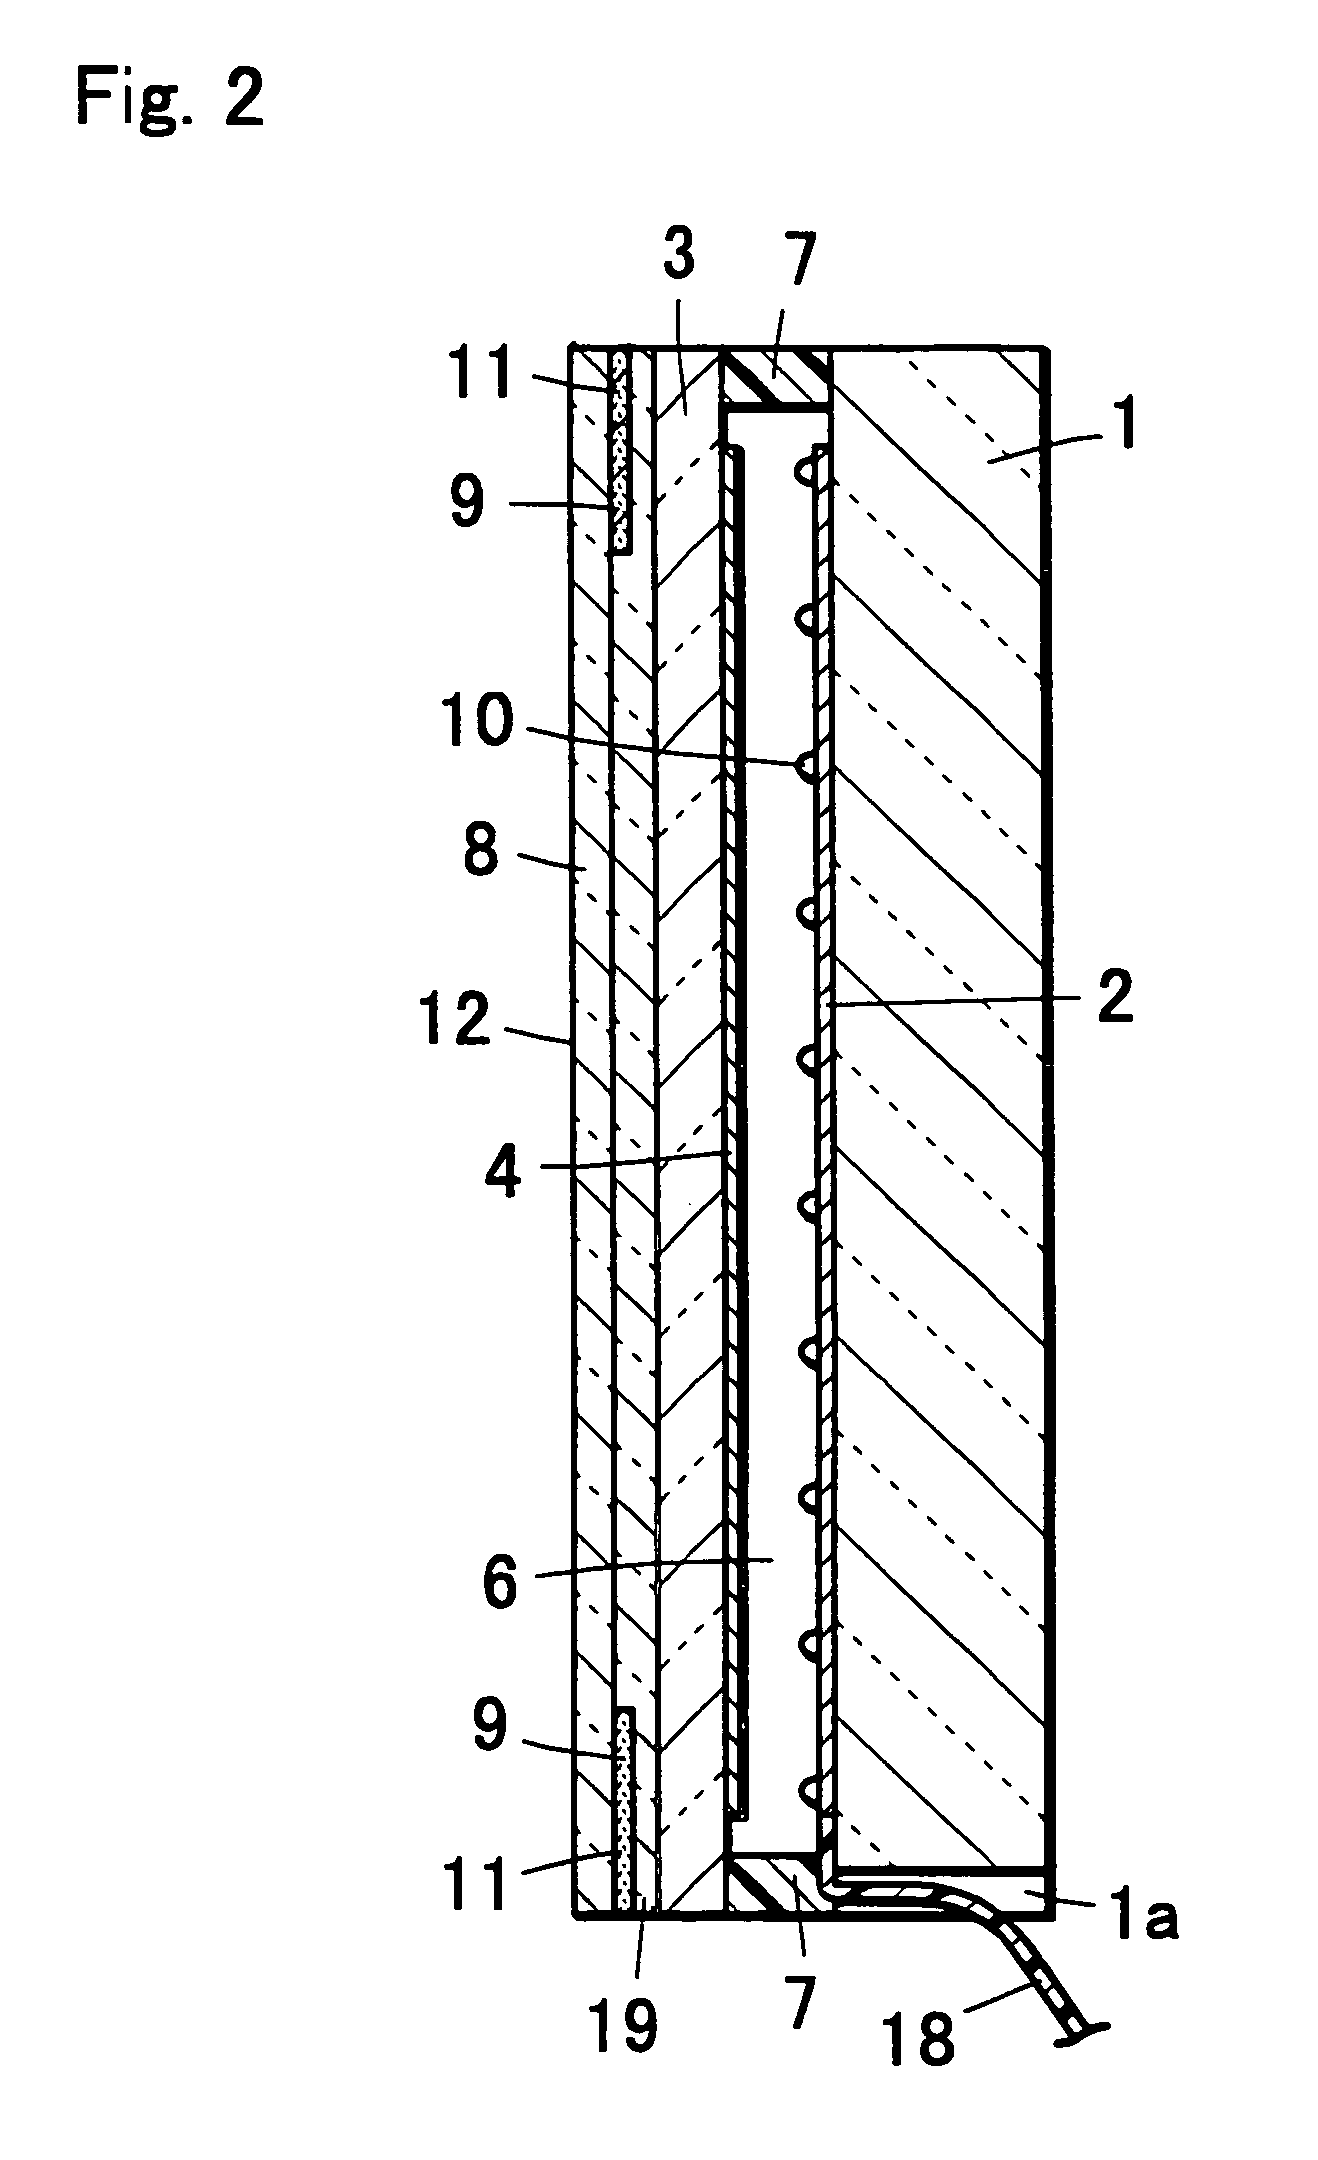 Electronic device with protection panel, protection panel, and method of fabricating protection panels